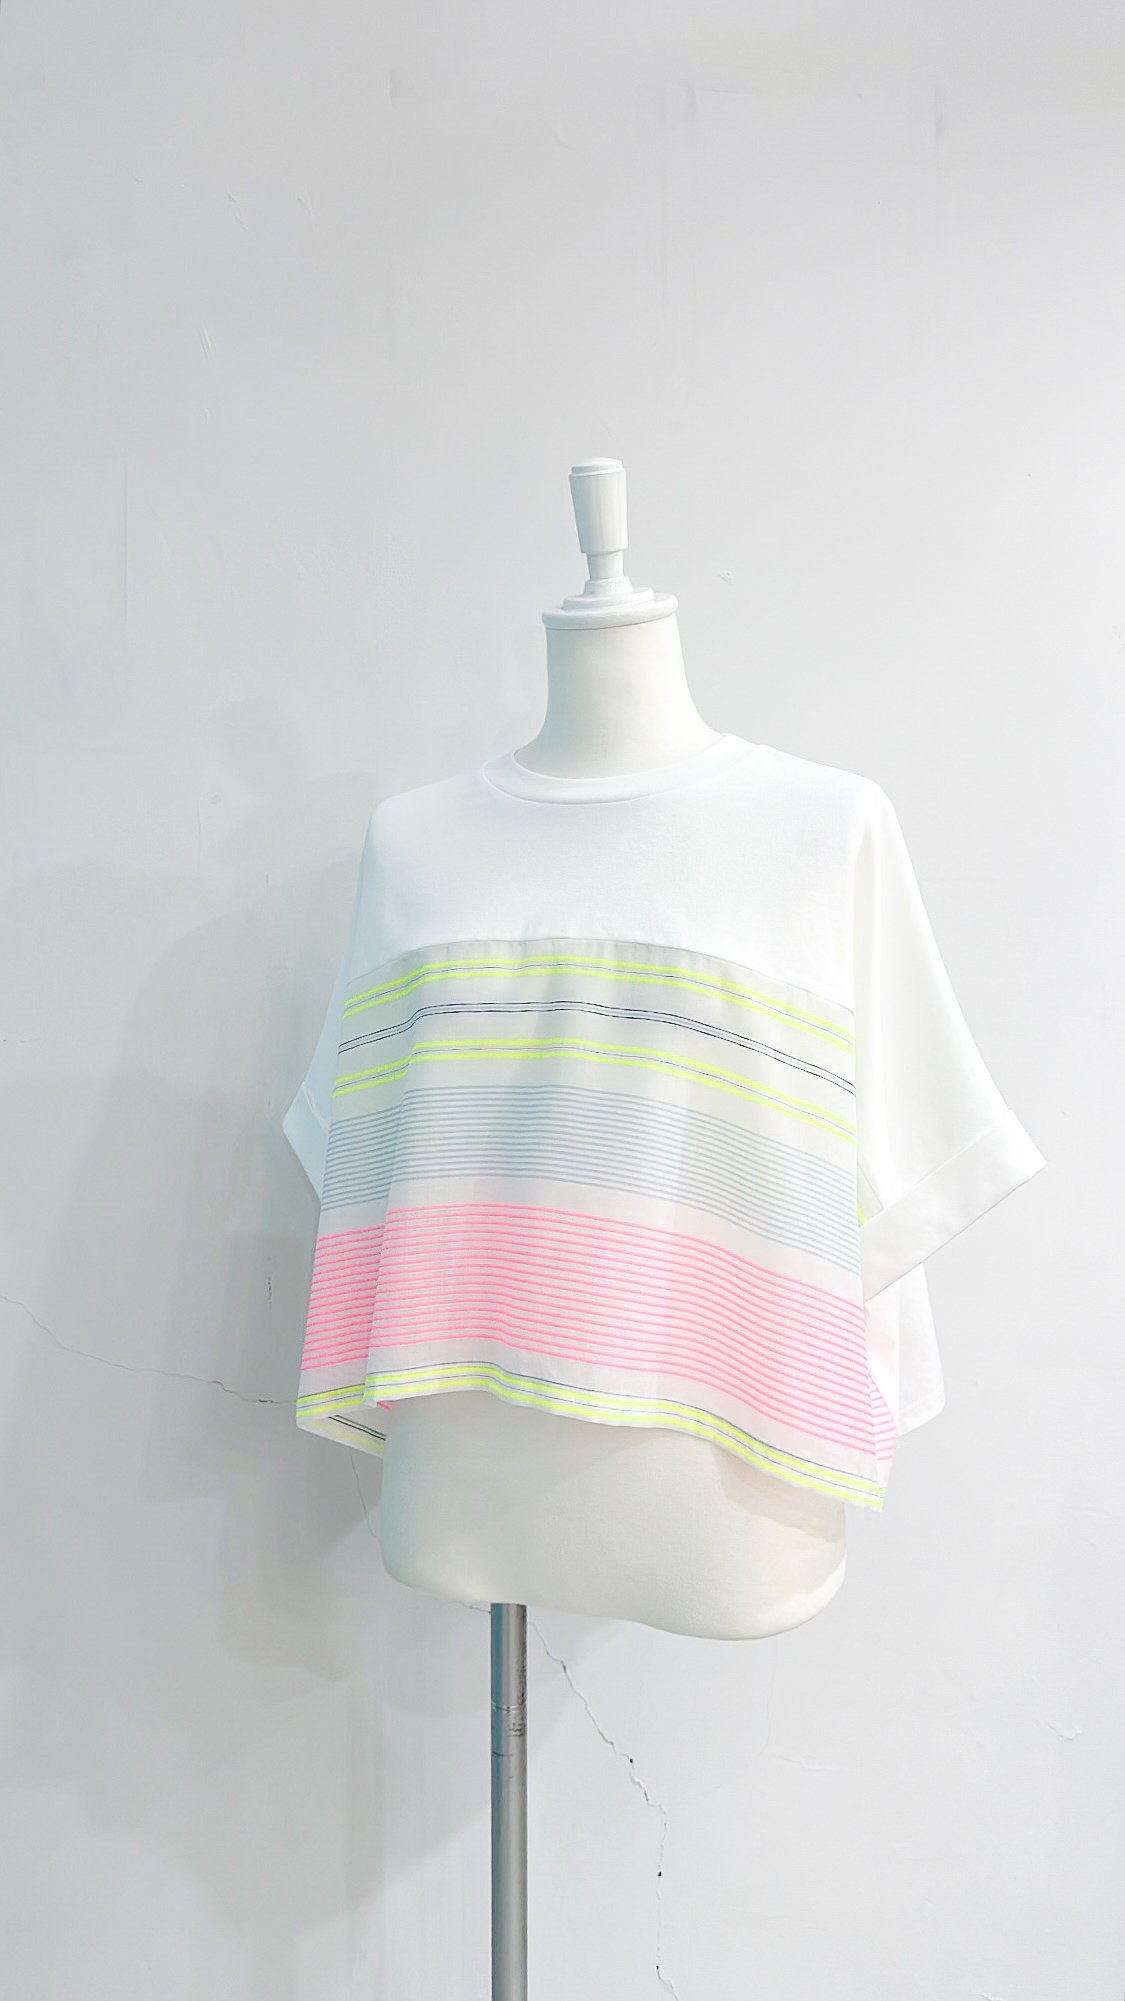 <img class='new_mark_img1' src='https://img.shop-pro.jp/img/new/icons47.gif' style='border:none;display:inline;margin:0px;padding:0px;width:auto;' />TEXTILE SHIRT T-SHIRT